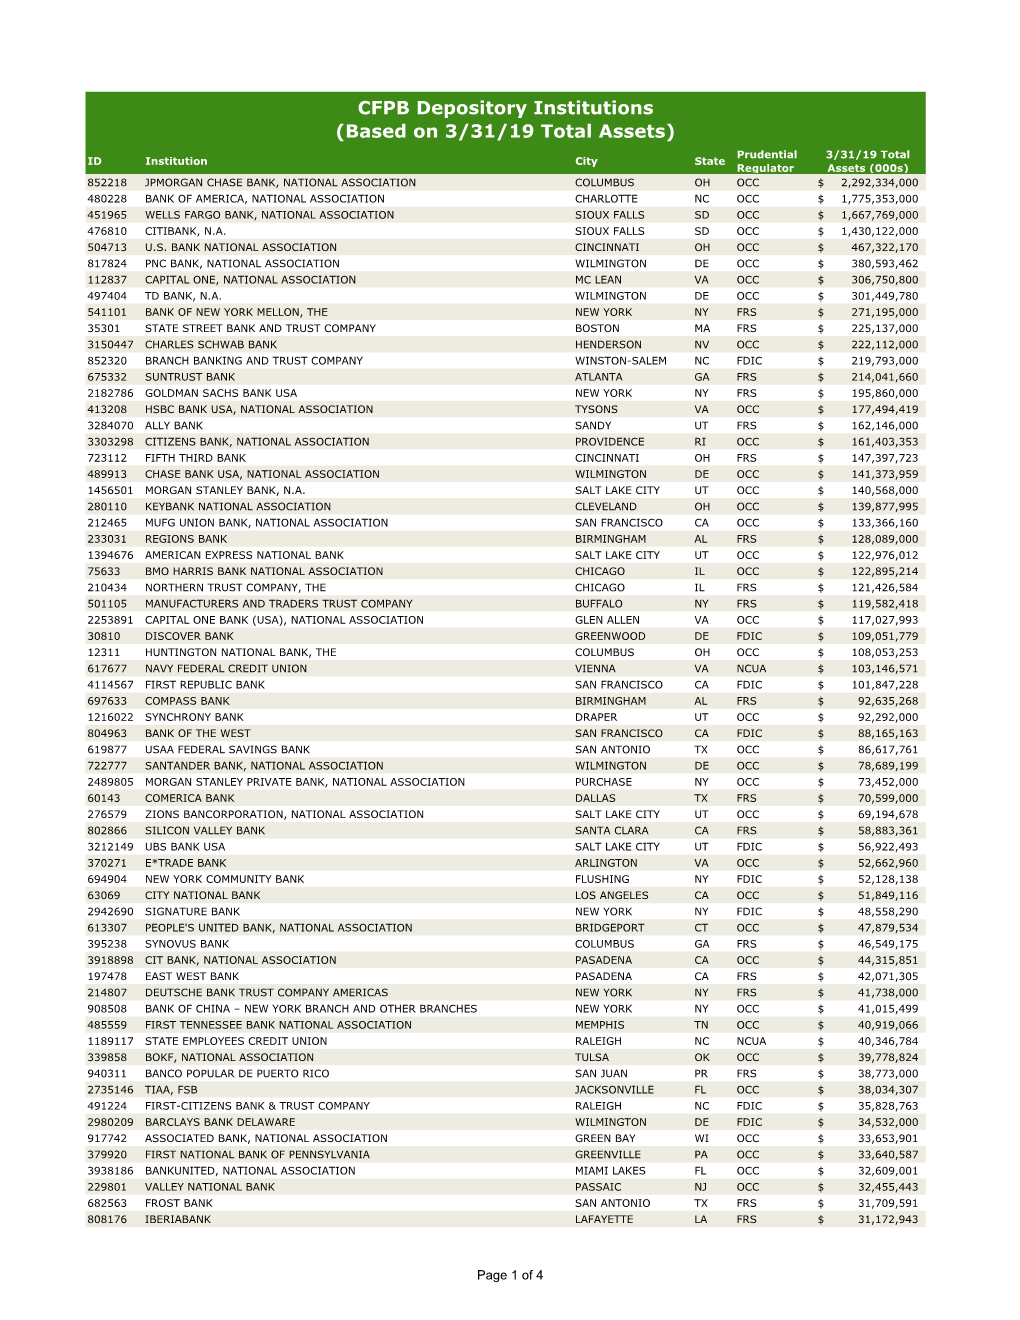 CFPB Depository Institutions (Based on 3/31/19 Total Assets)